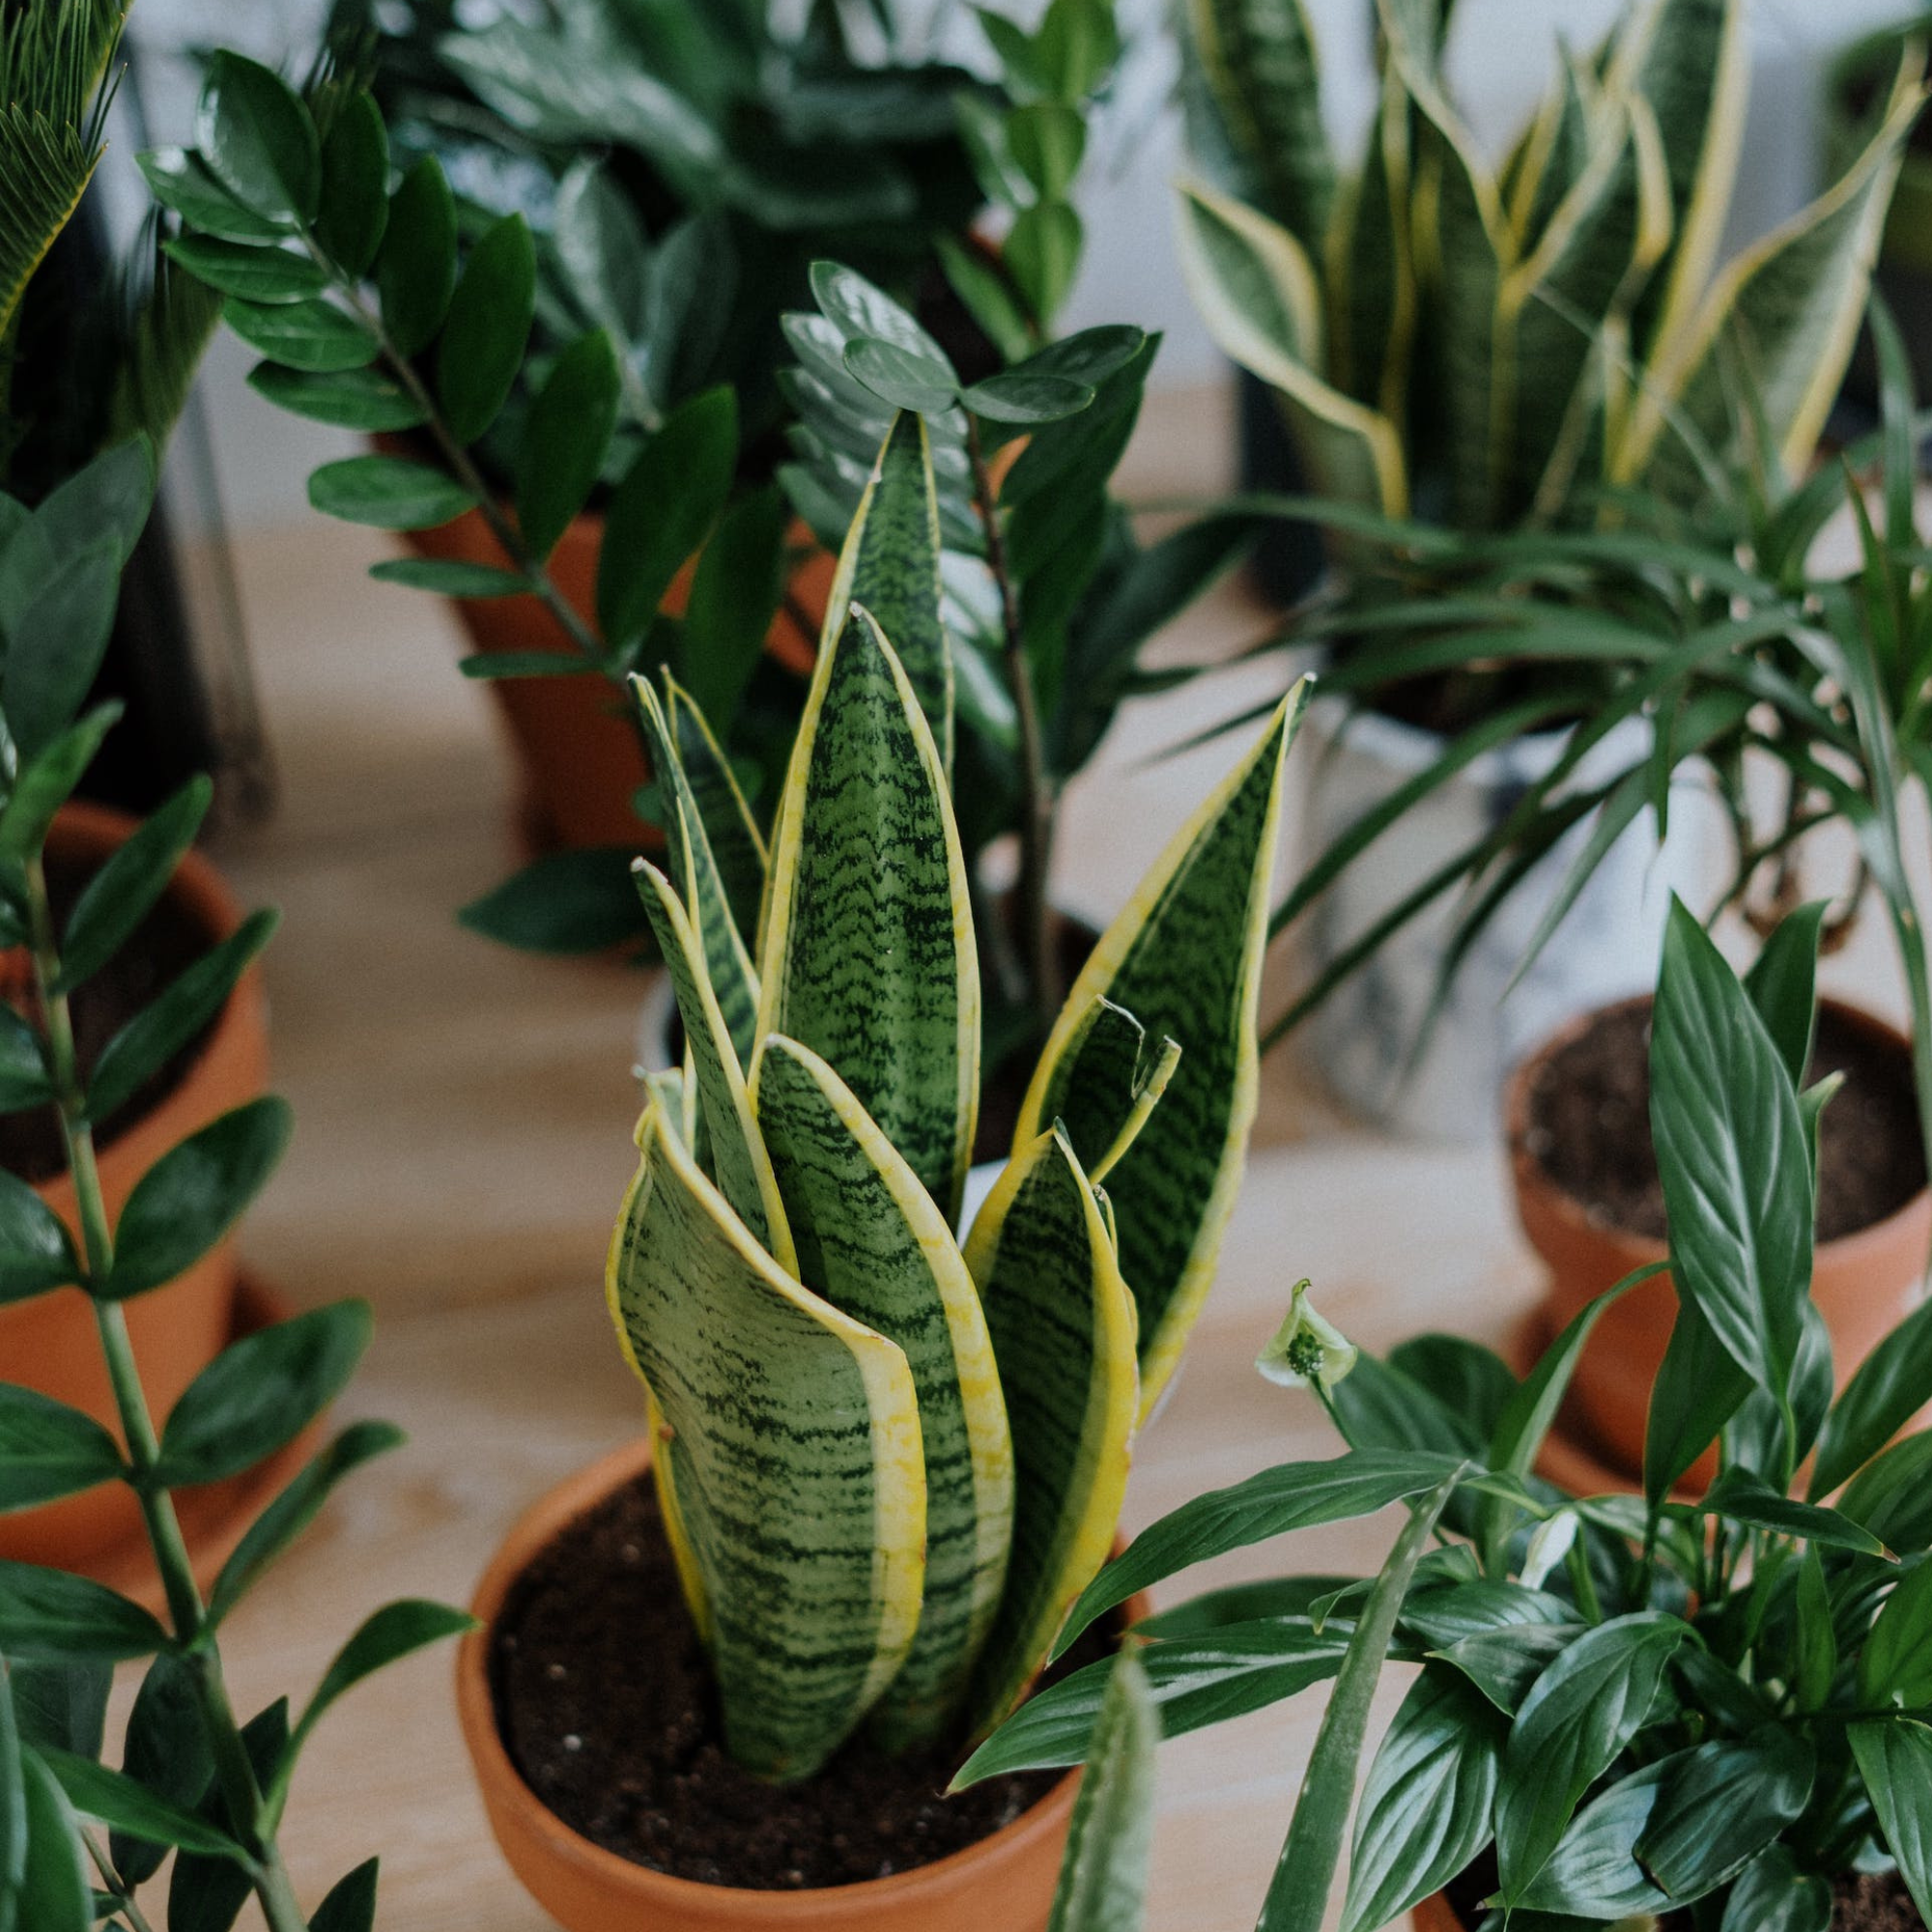 Winter is Here! A Guide to Nurturing Your Houseplants Through The Cozy, Chilly Months